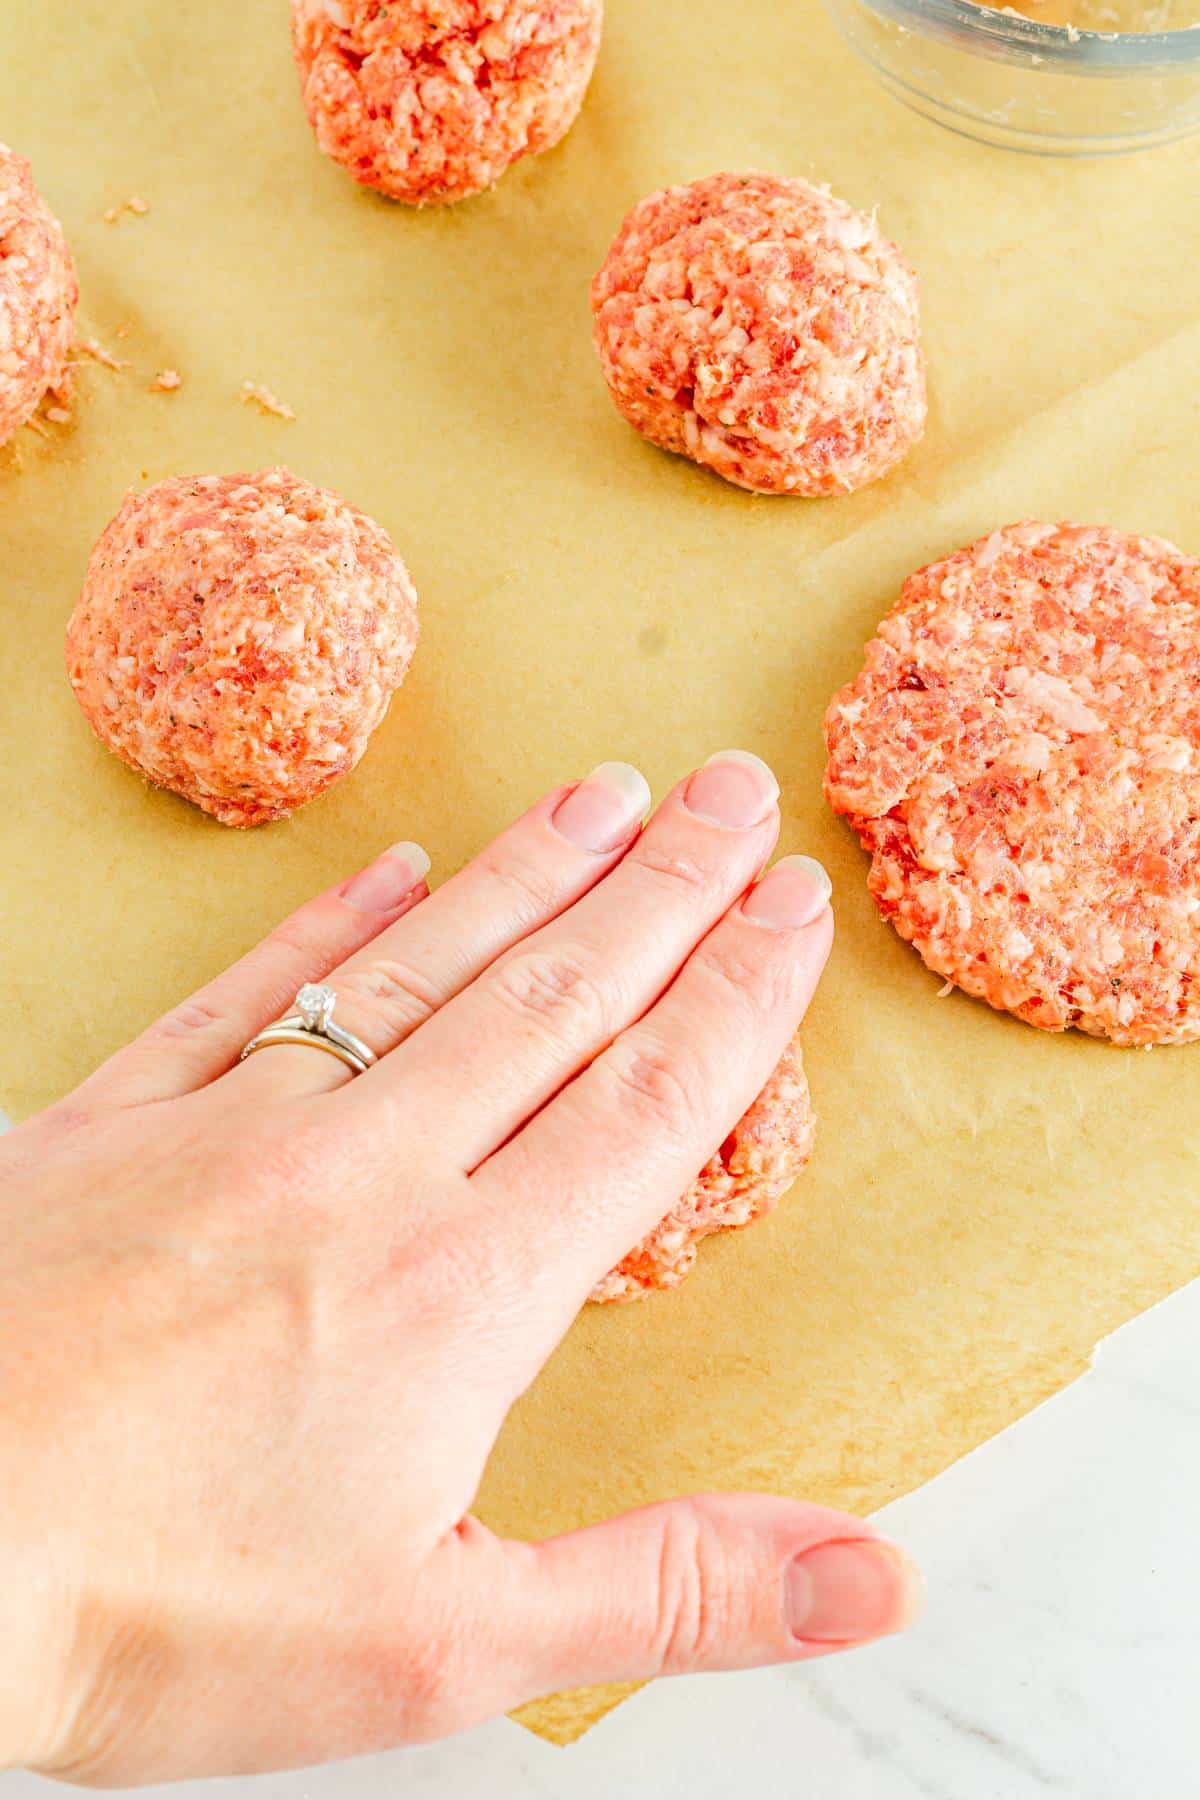 A person is making patties from ground sausage.